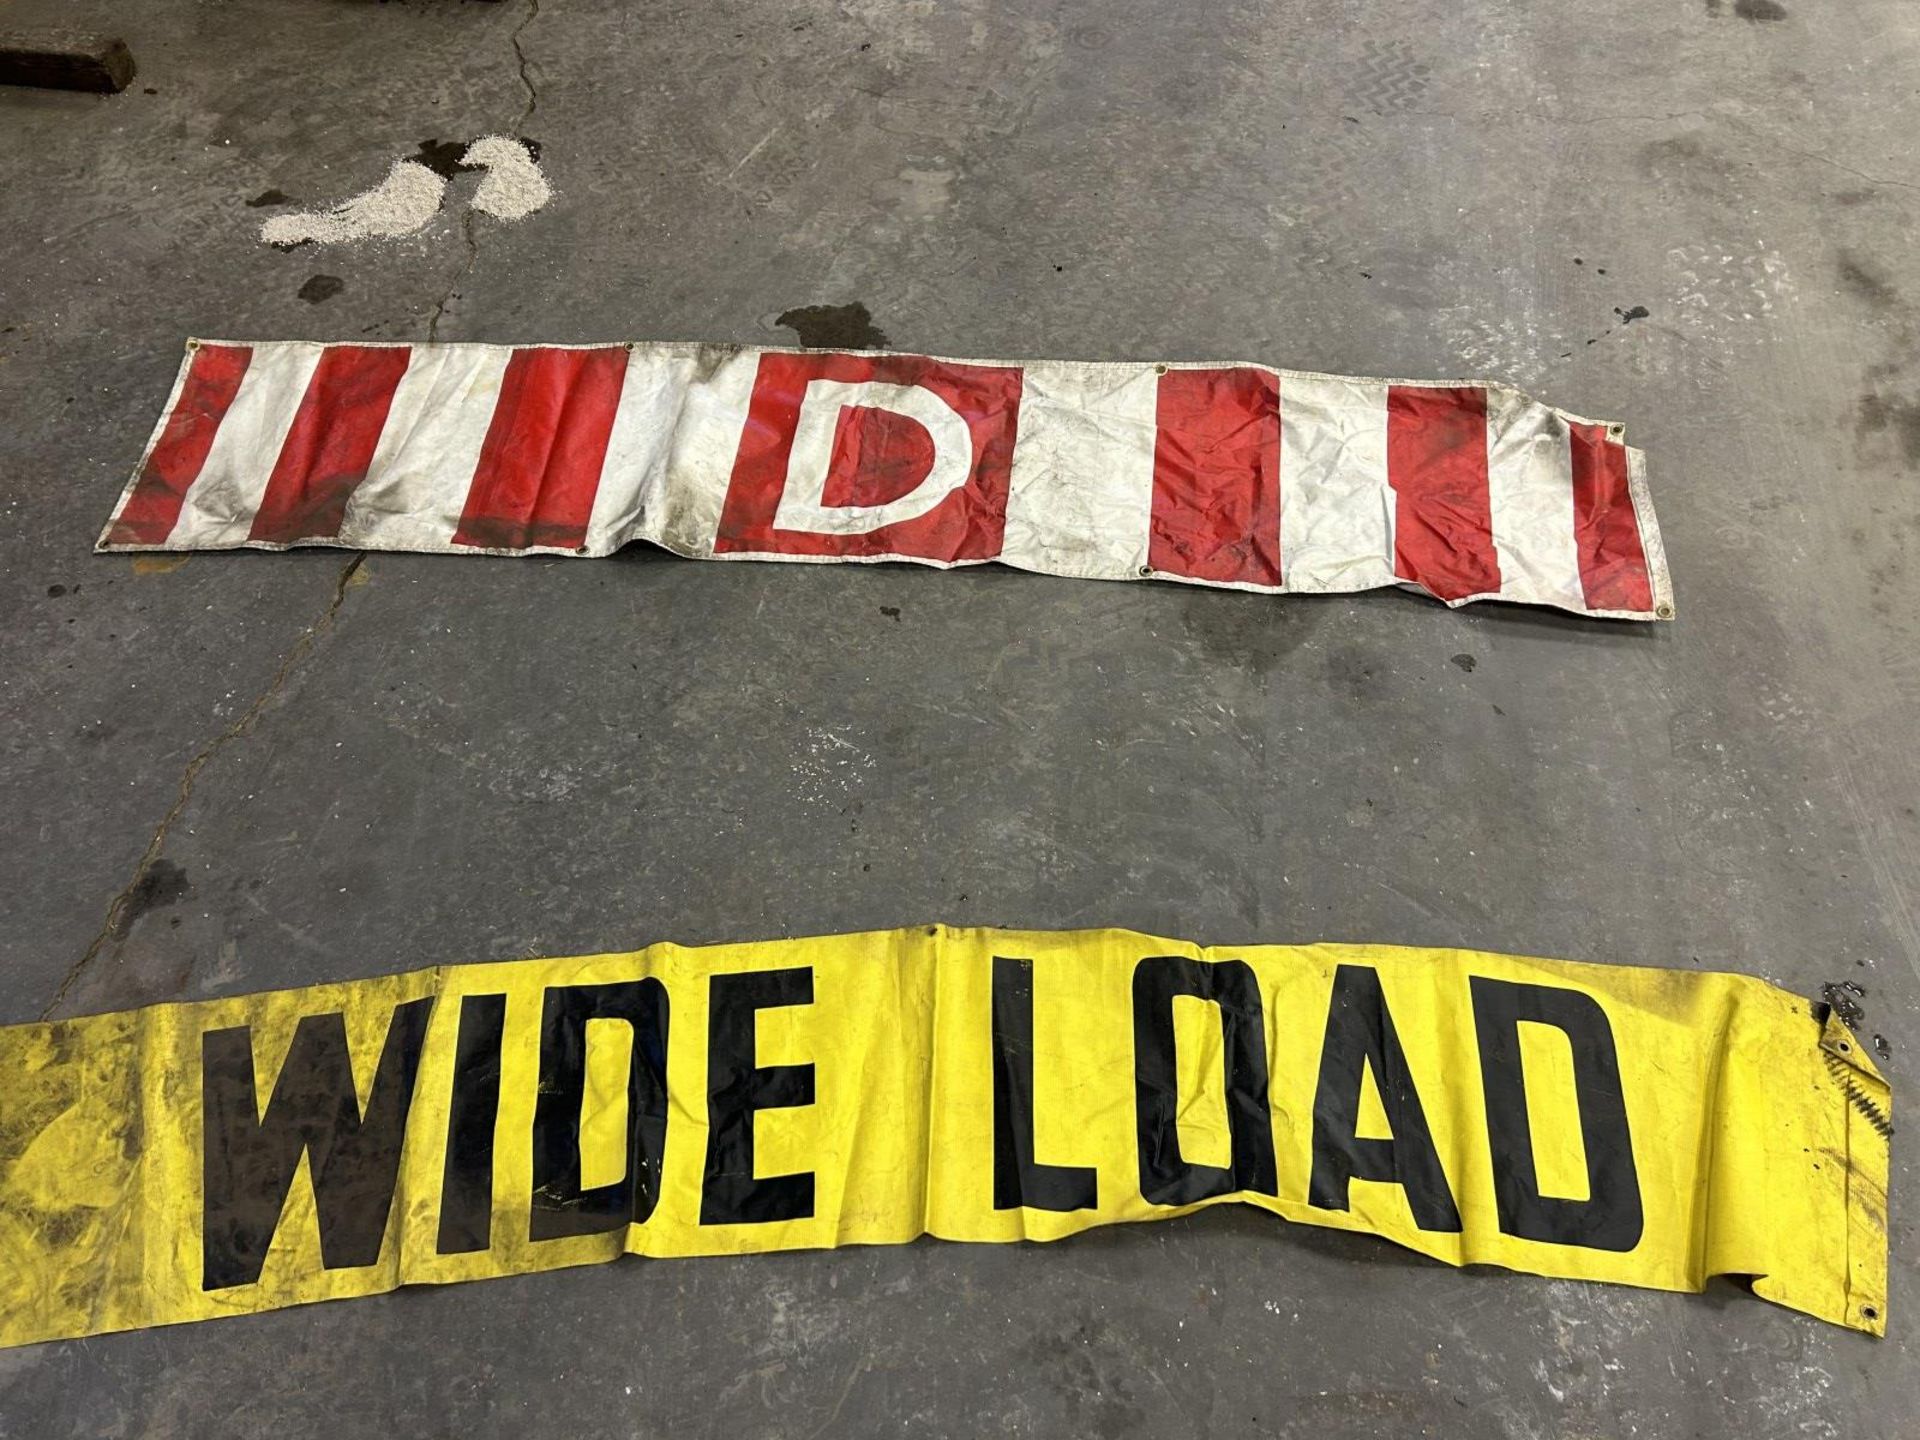 2 - TRUCK TAIL LIGHTS, 2 - WIDE LOAD SIGNS - Image 2 of 6